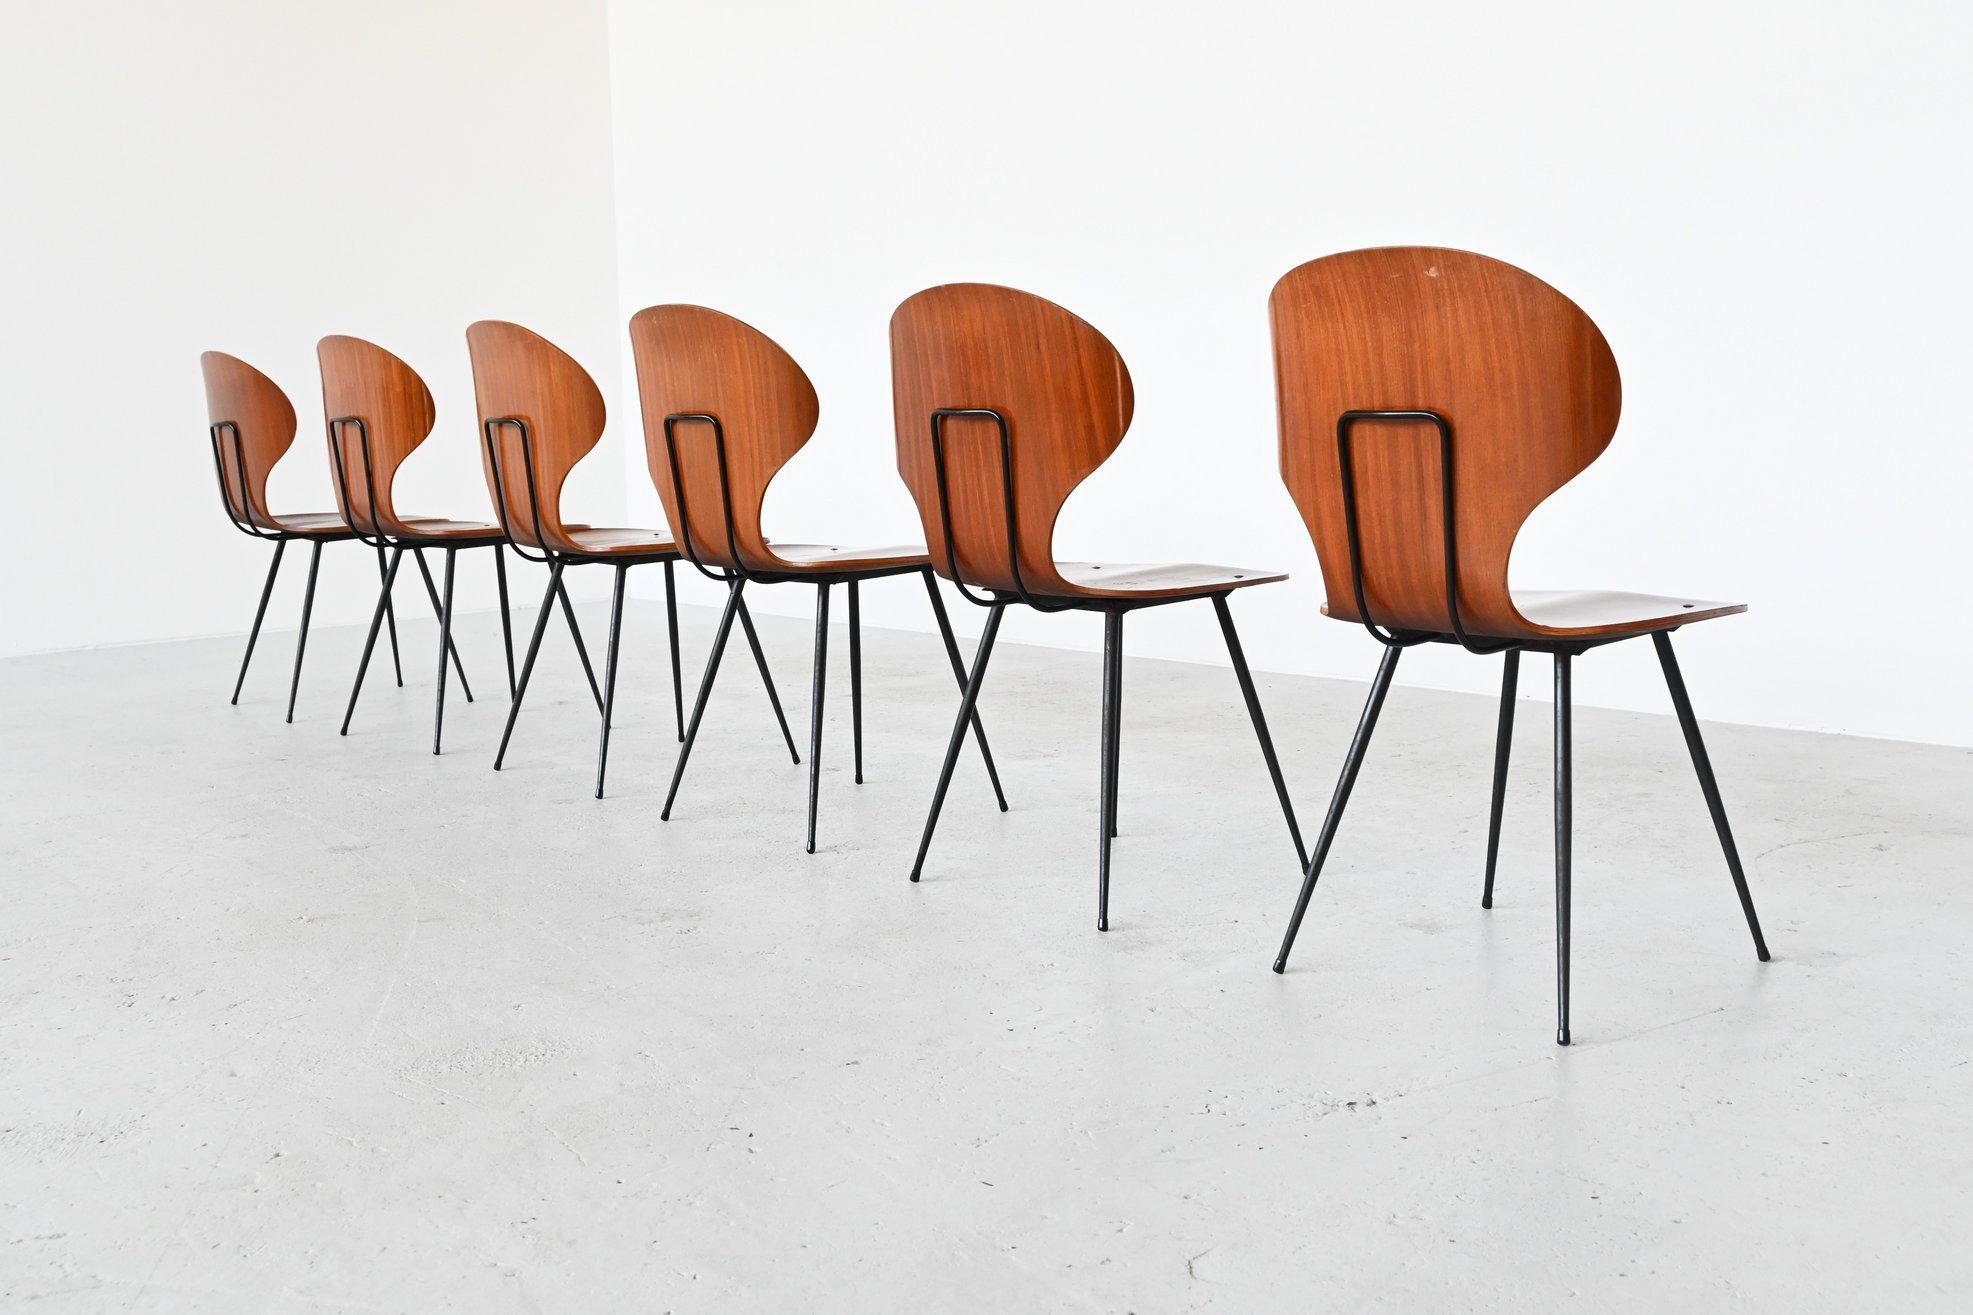 Beautiful elegant set of six dining chairs designed by Carlo Ratti and manufactured by Lissoni, Italy, 1950. These chairs have a teak plywood seat and black lacquered metal legs. The seat features a wingback with very nice curves. The curved seat is